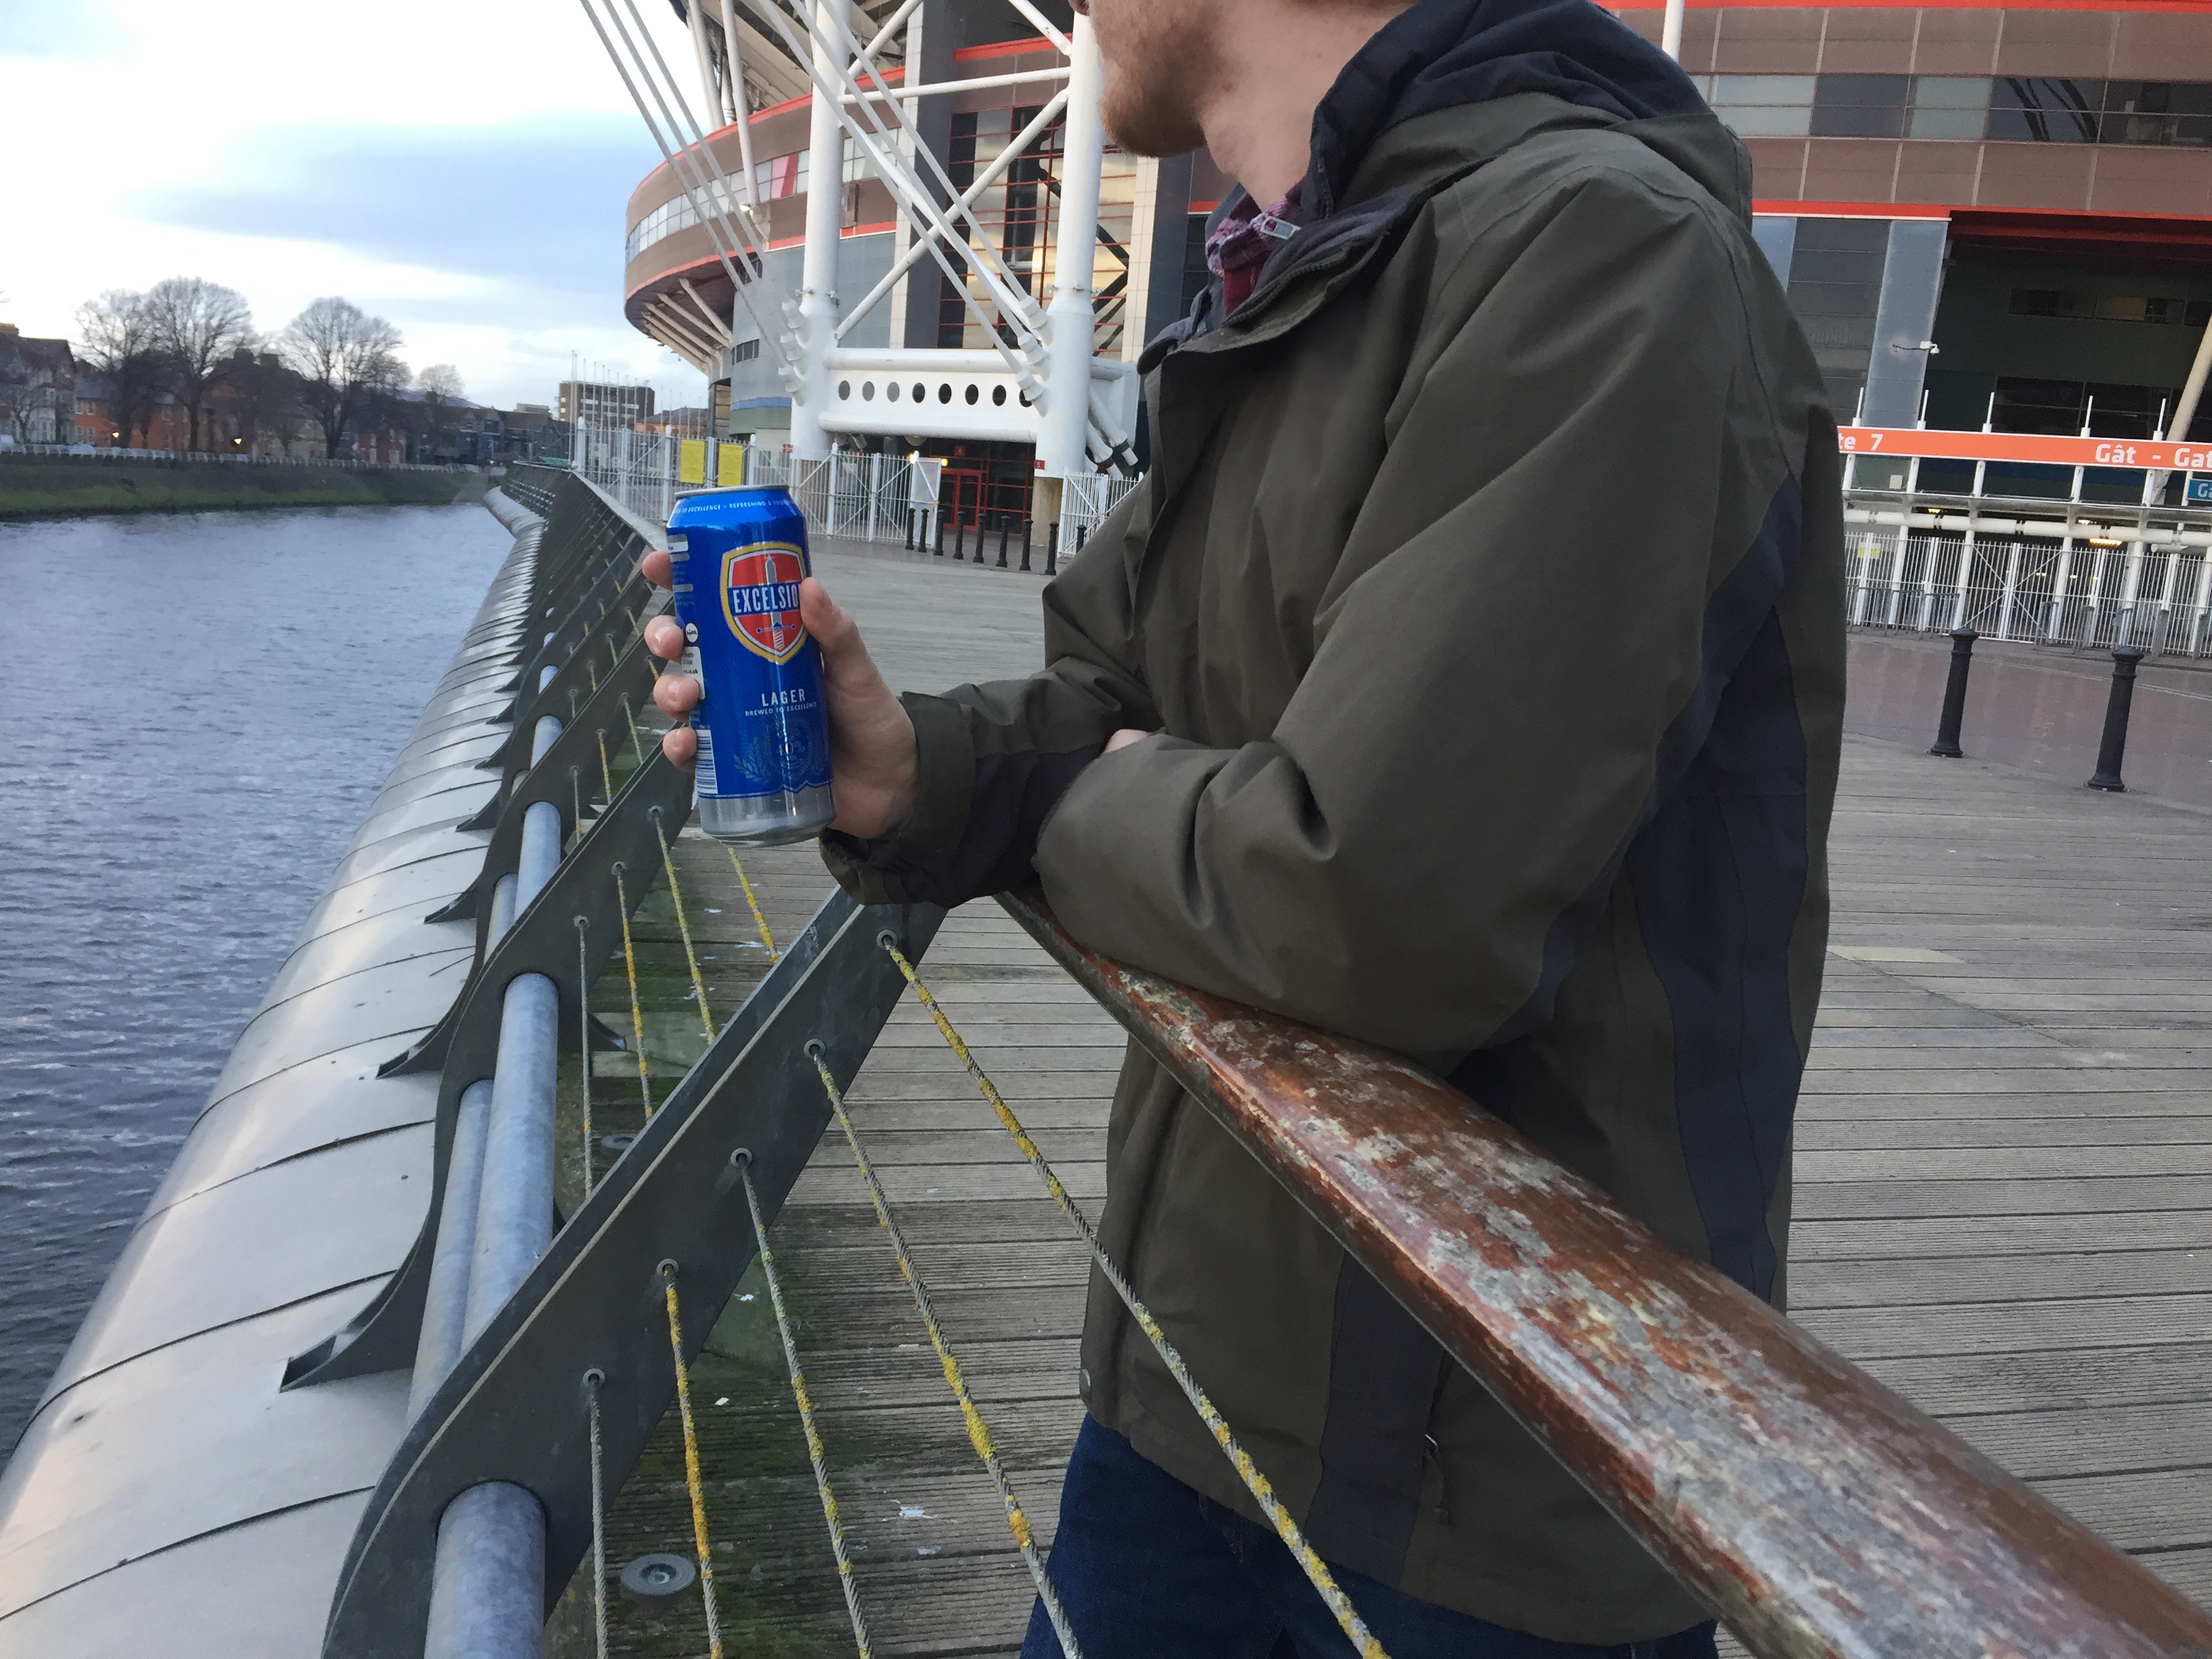 Man drinking alcohol in Cardiff